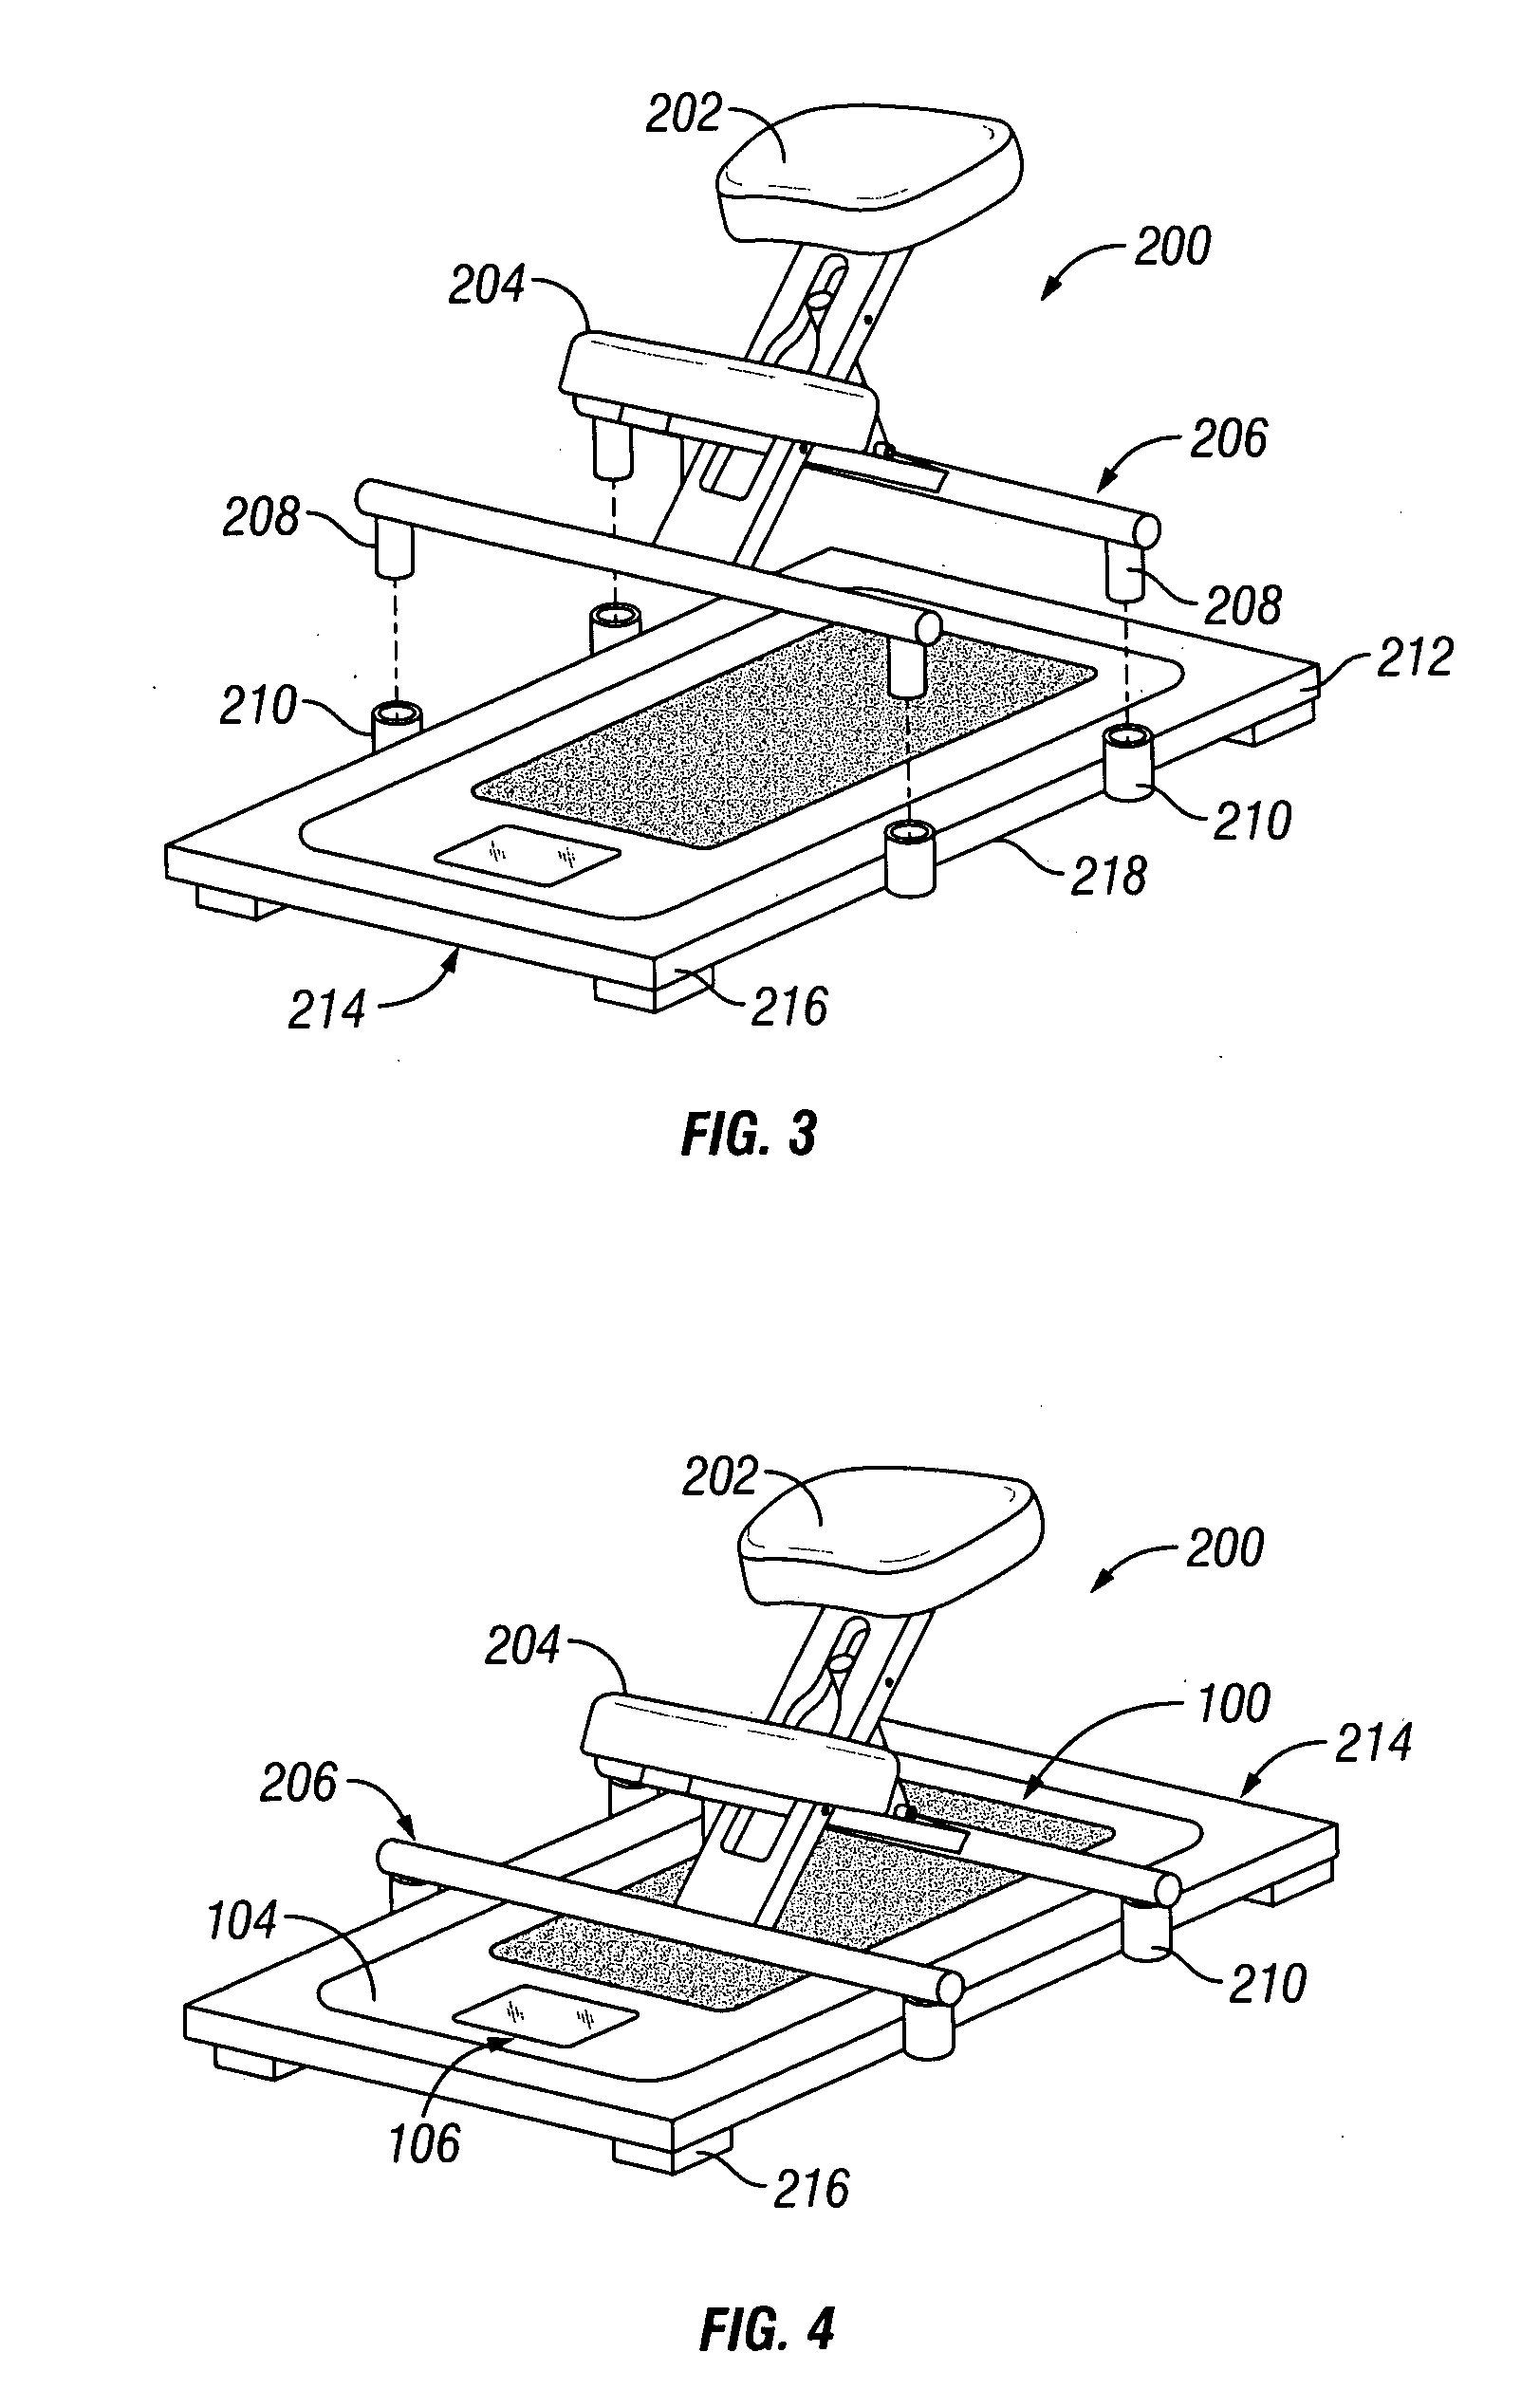 Supplemental support structures adapted to receive a non-invasive dynamic motion therapy device